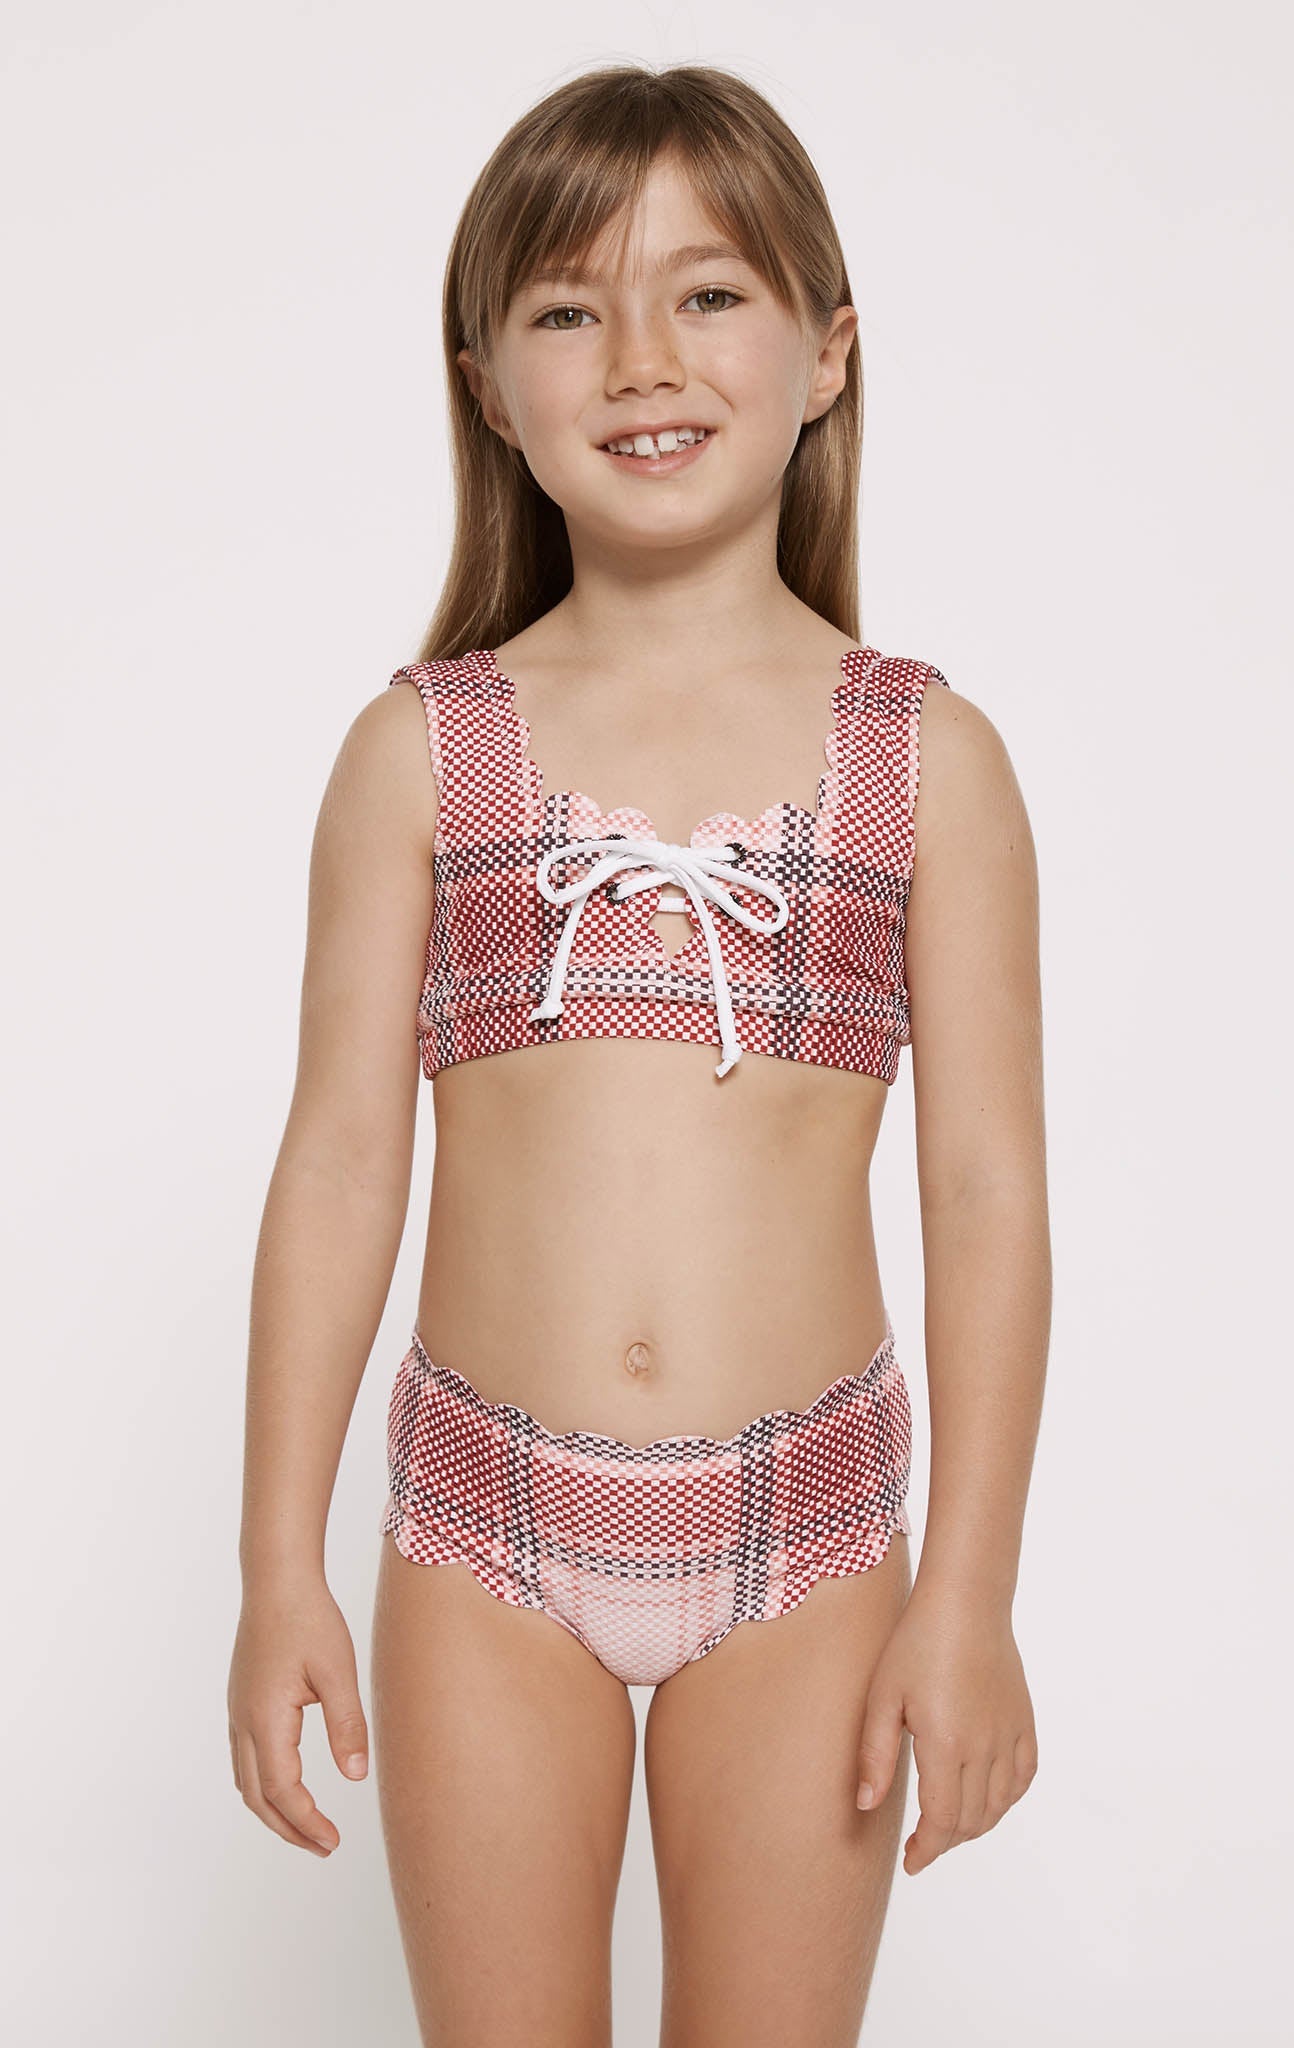 MARYSIA Bumby Palm Springs Tie Top in Plaid/Bloom